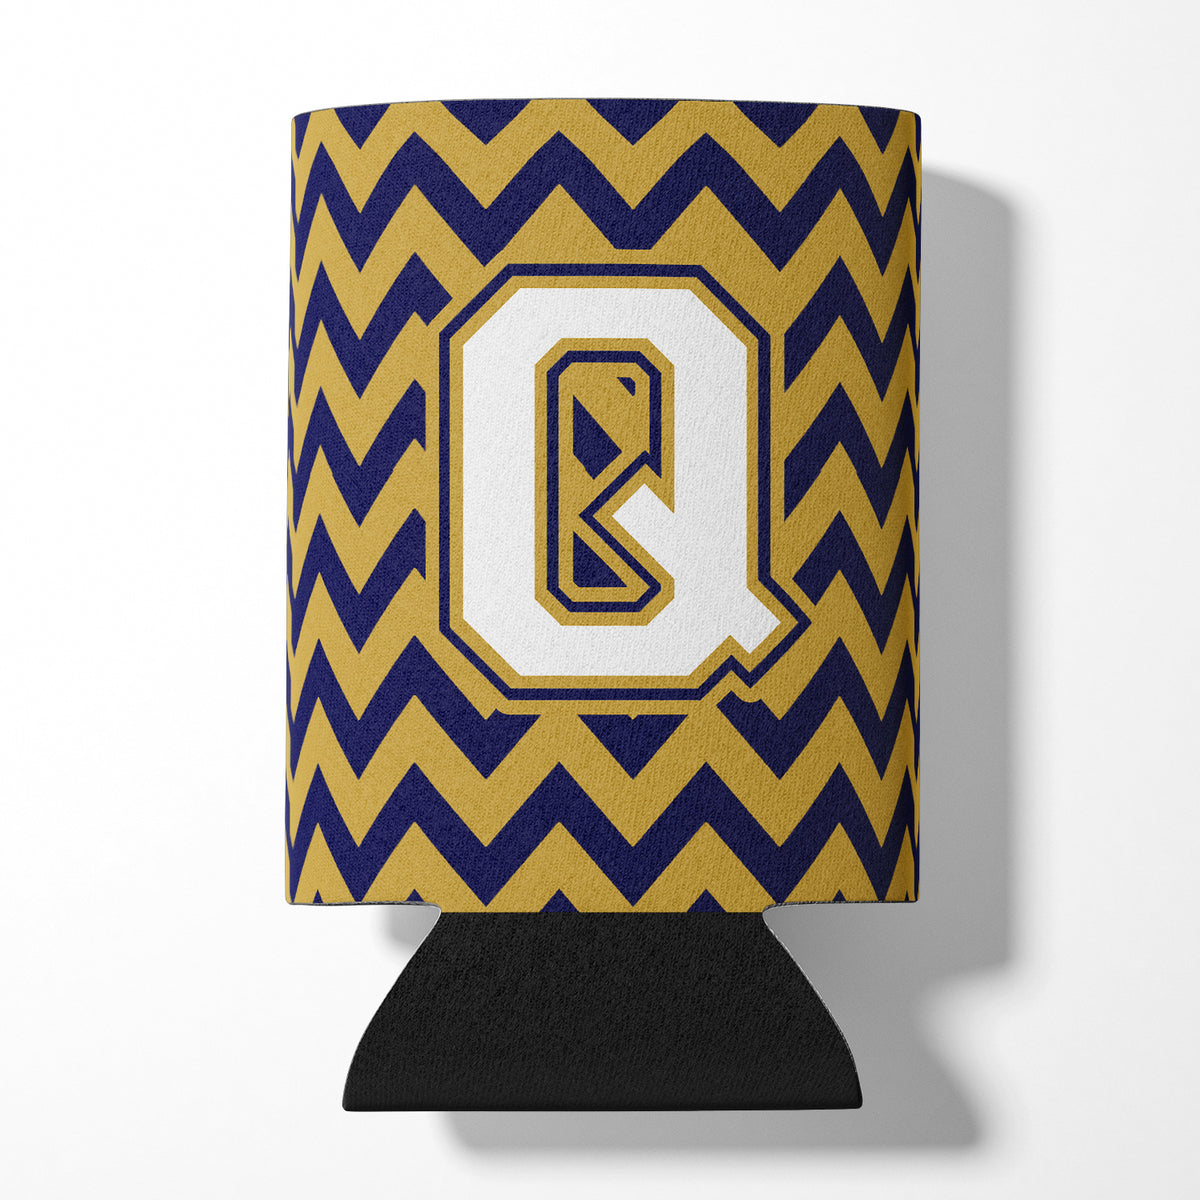 Letter Q Chevron Navy Blue and Gold Can or Bottle Hugger CJ1057-QCC